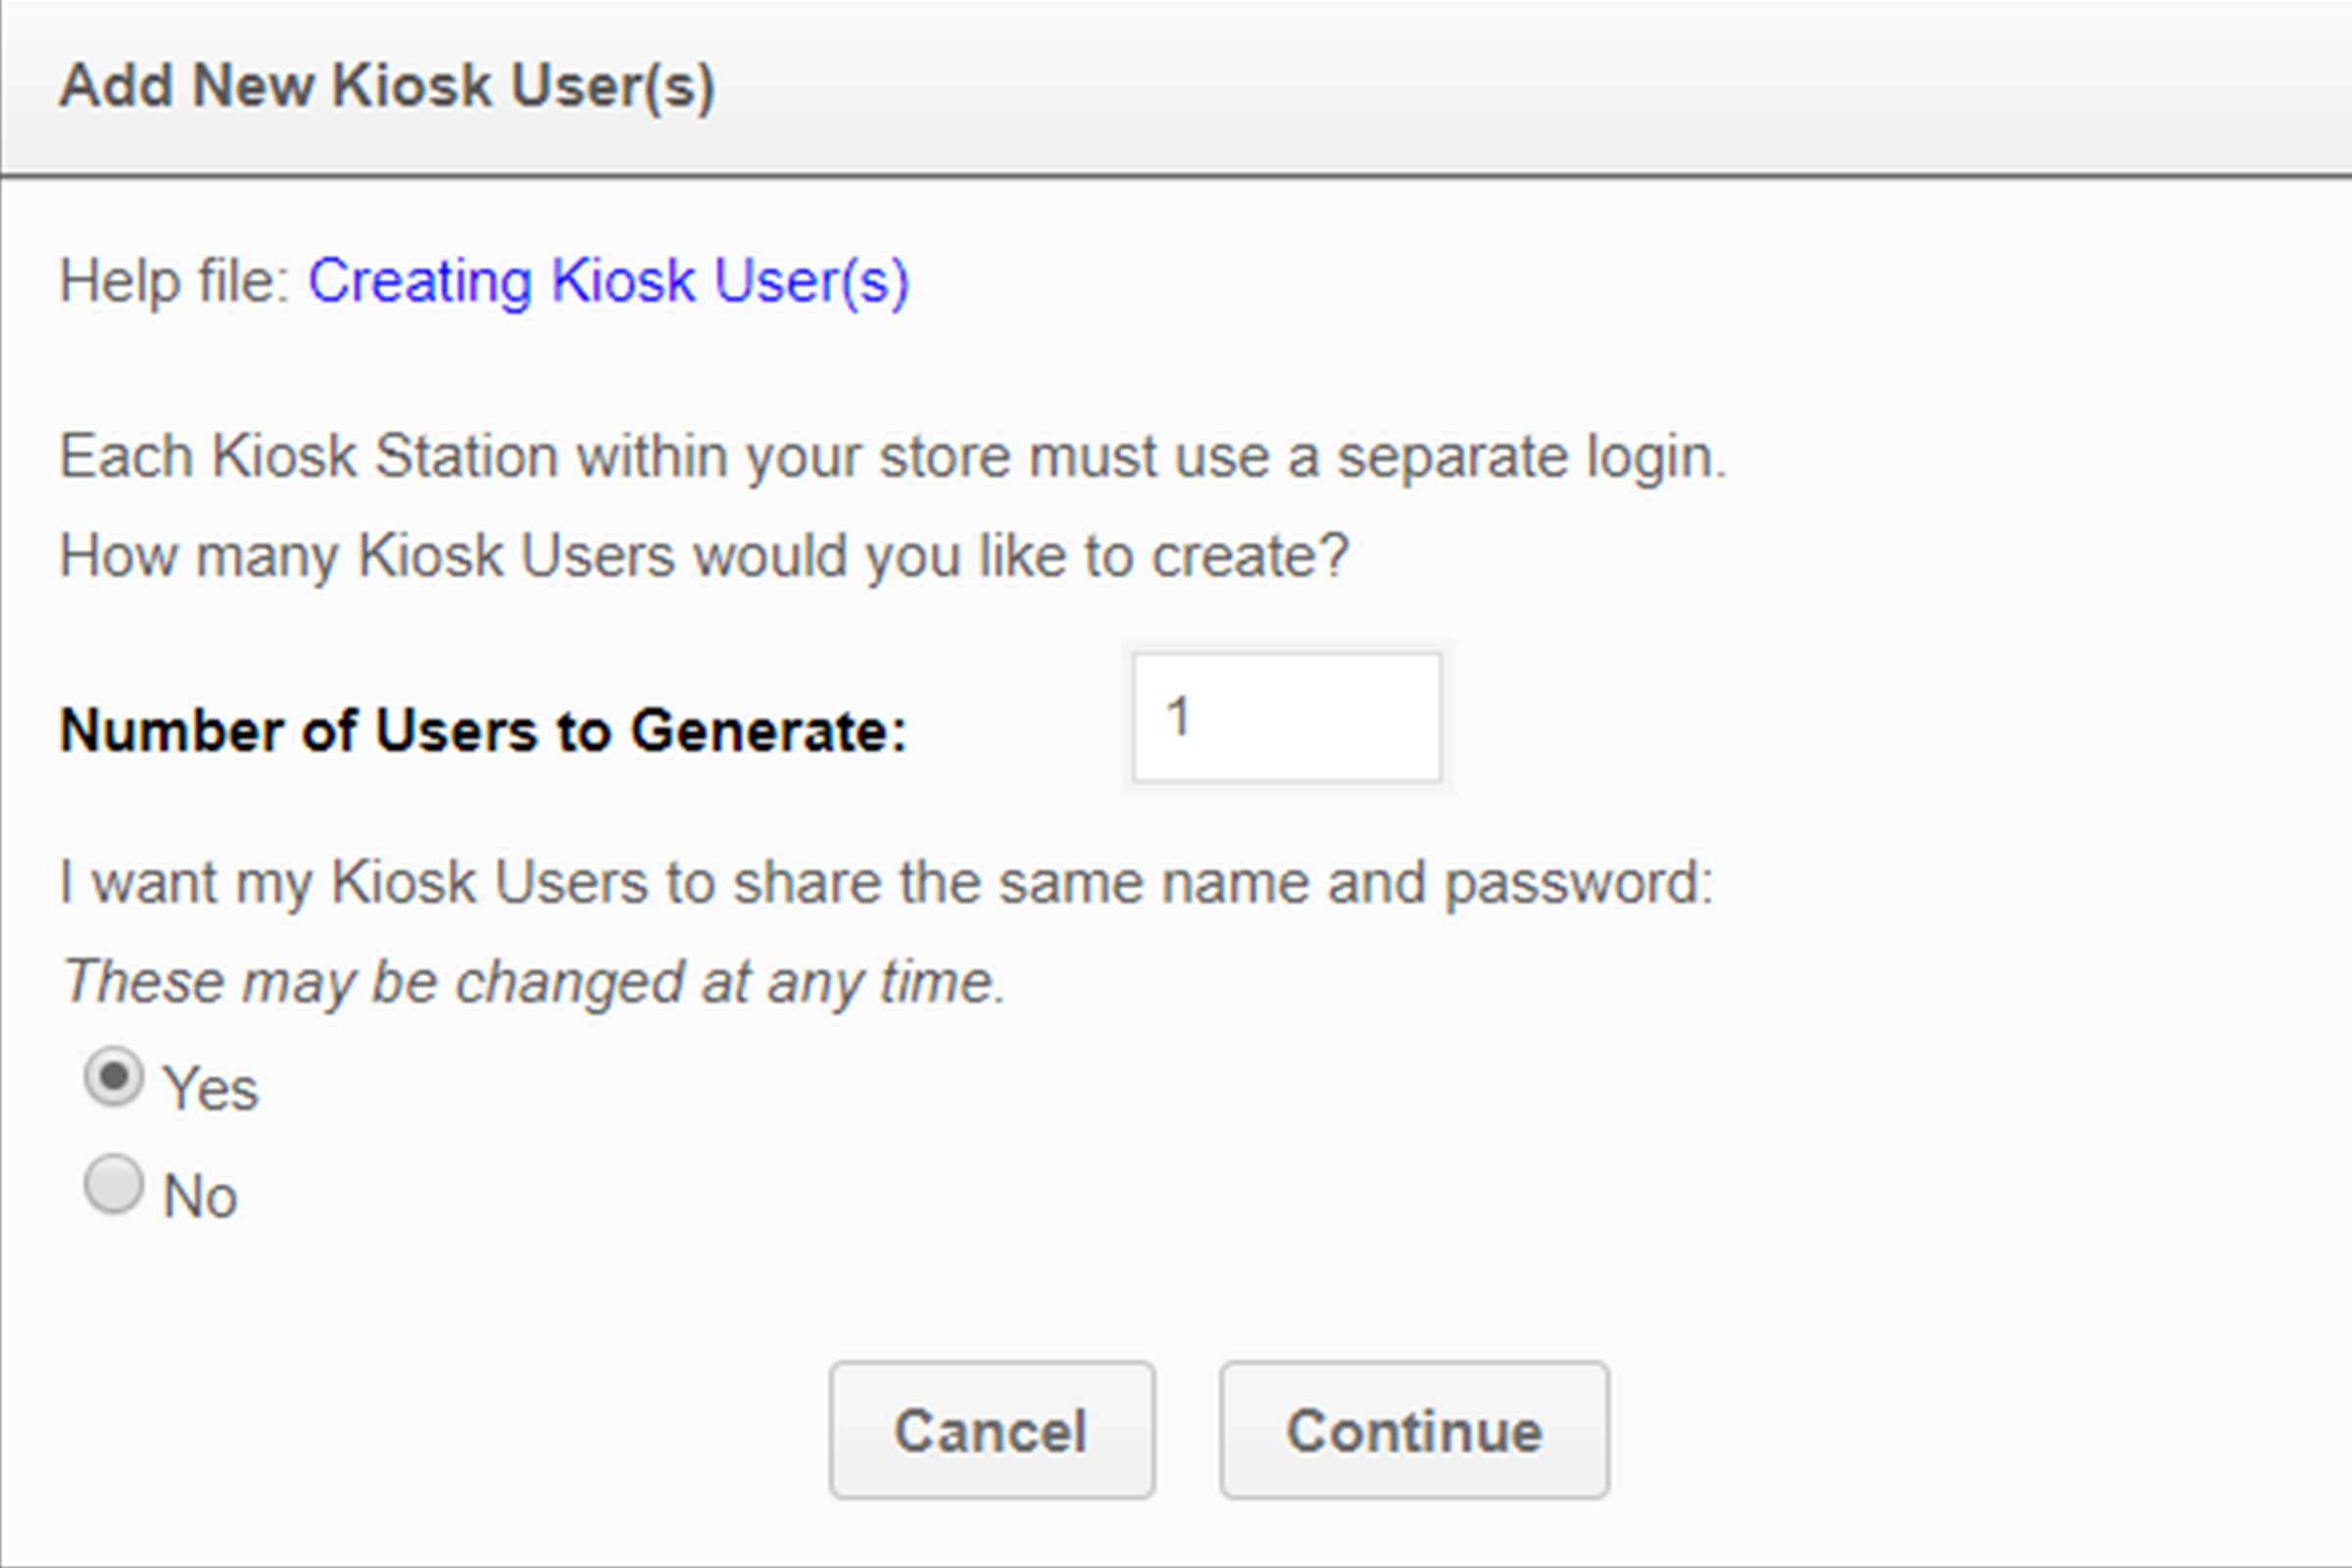 A screenshot of the Add New Kiosk User(s) popup. This screen allows you to enter a number of kiosk users to generate and select if you want to create a shared password.